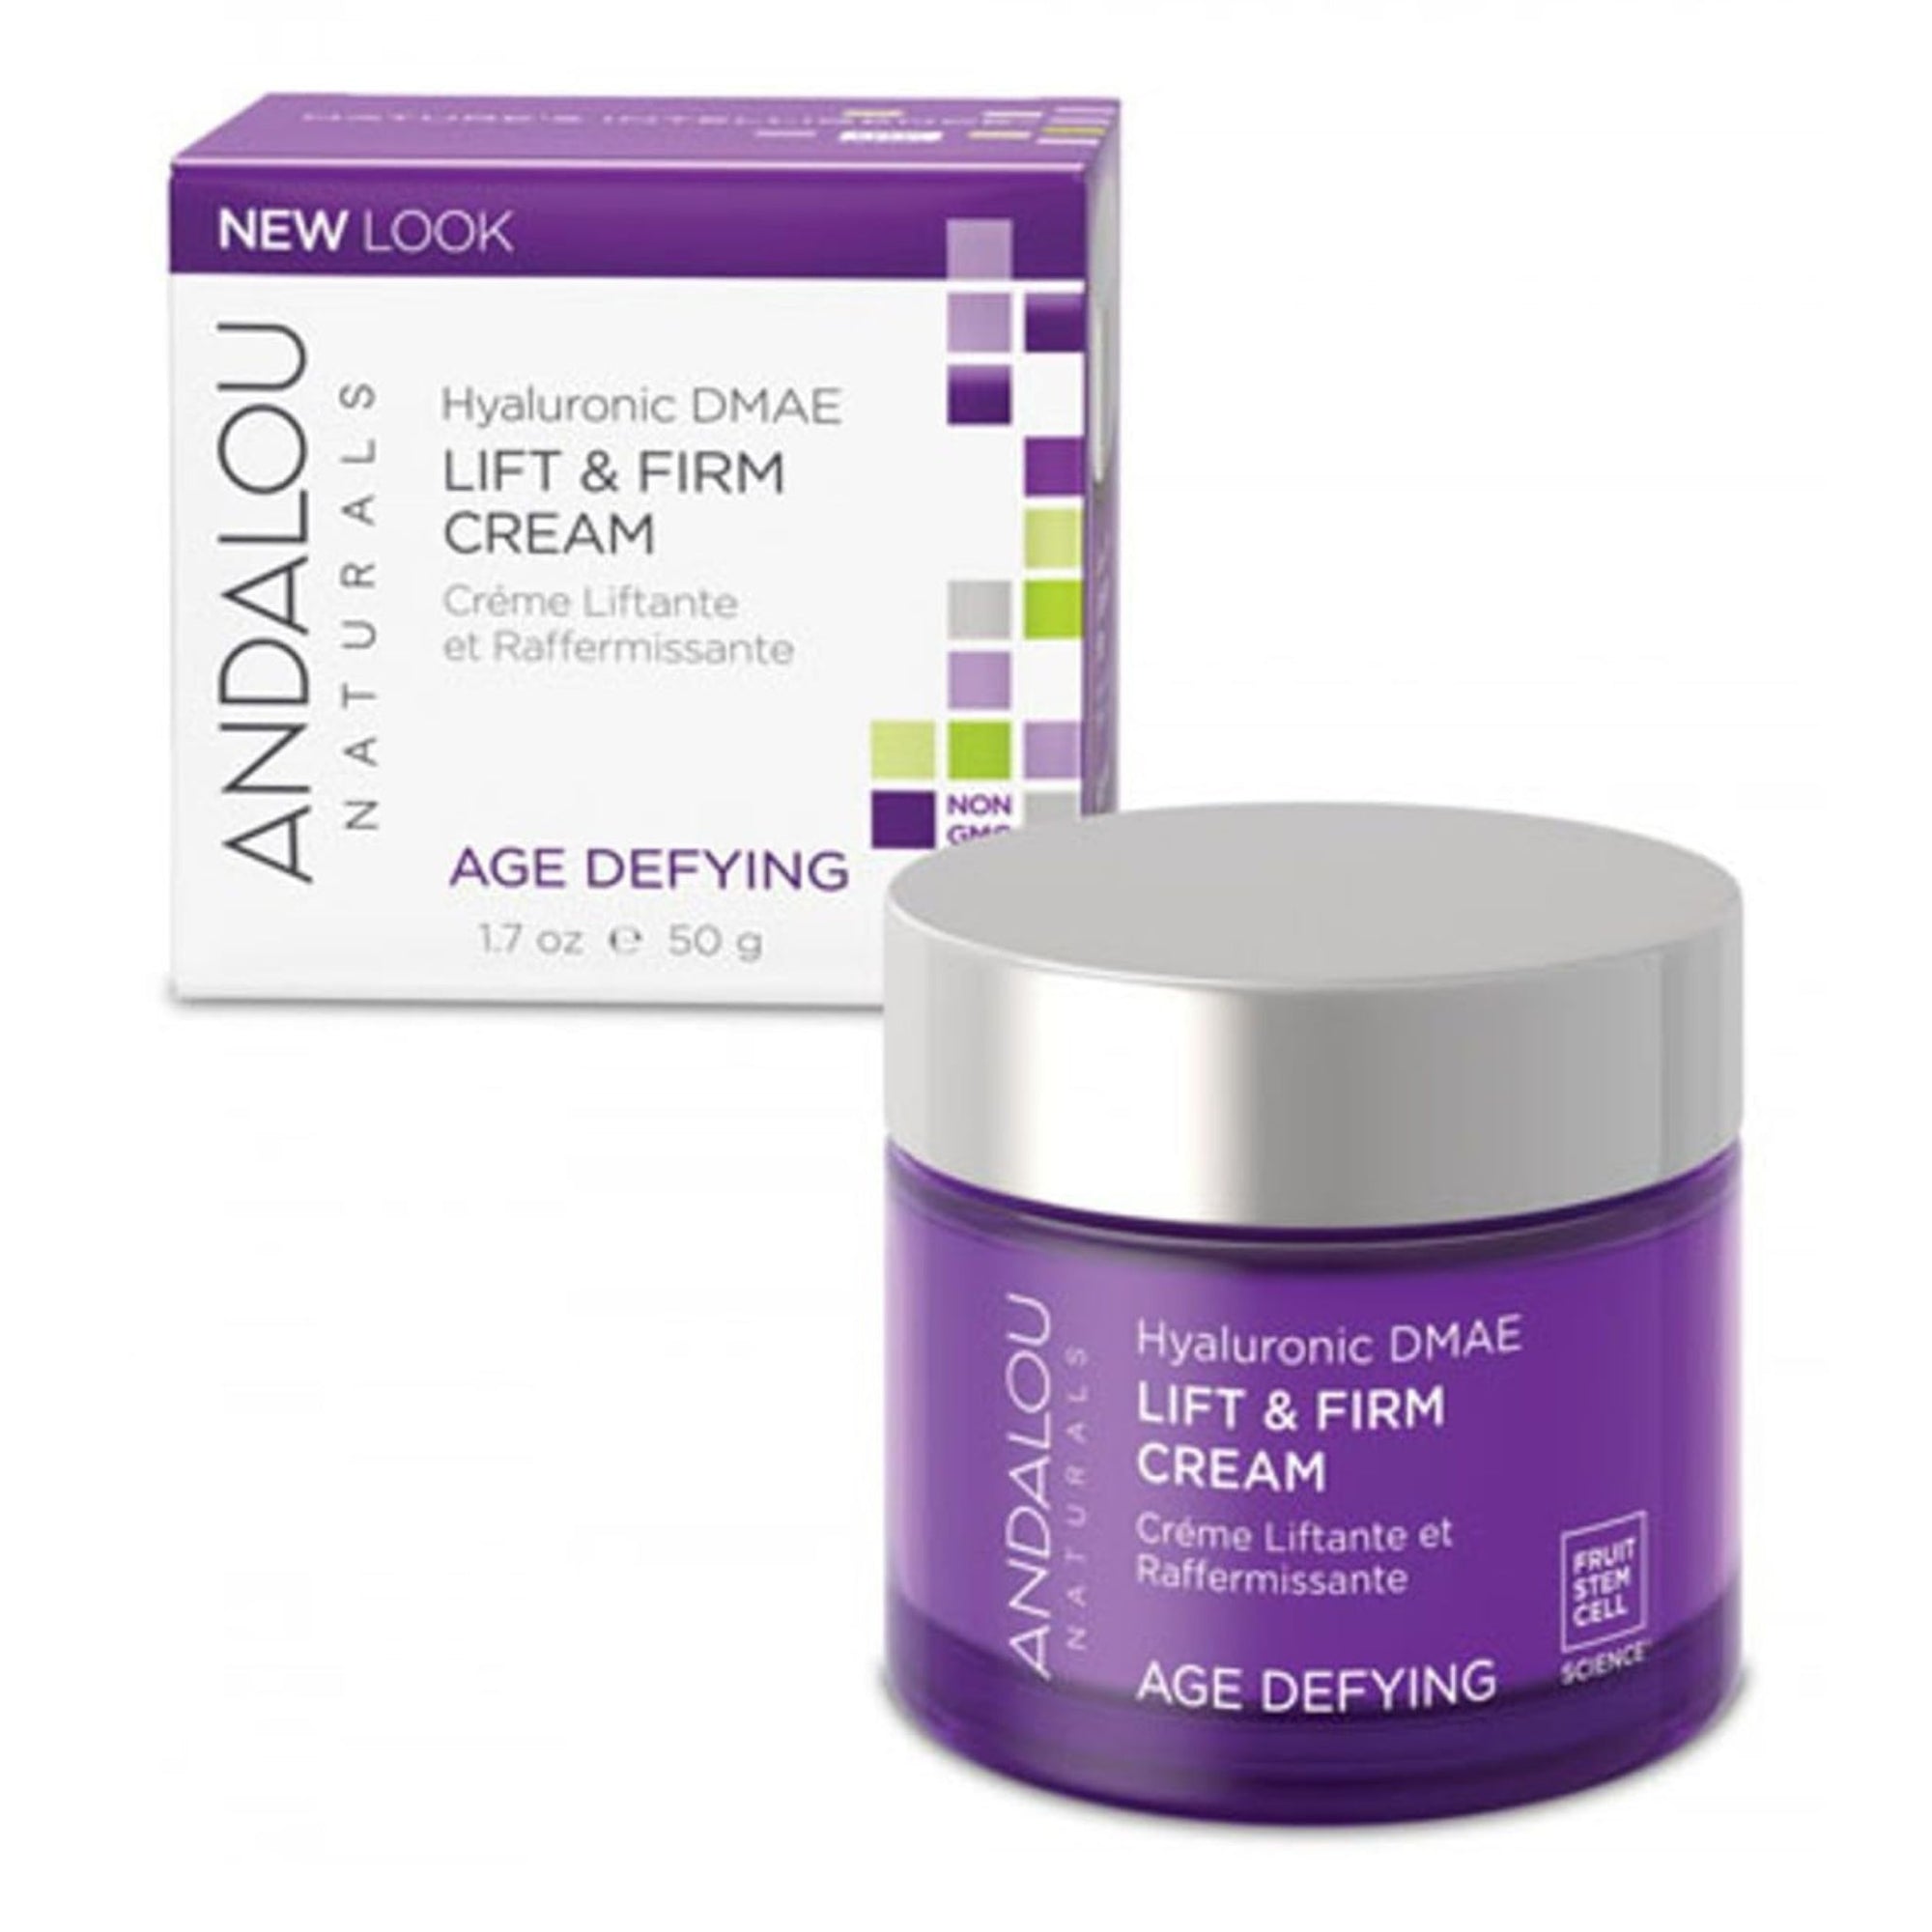 Andalou Age Defying Hyaluronic DMAE Lift & Firm Cream 50g